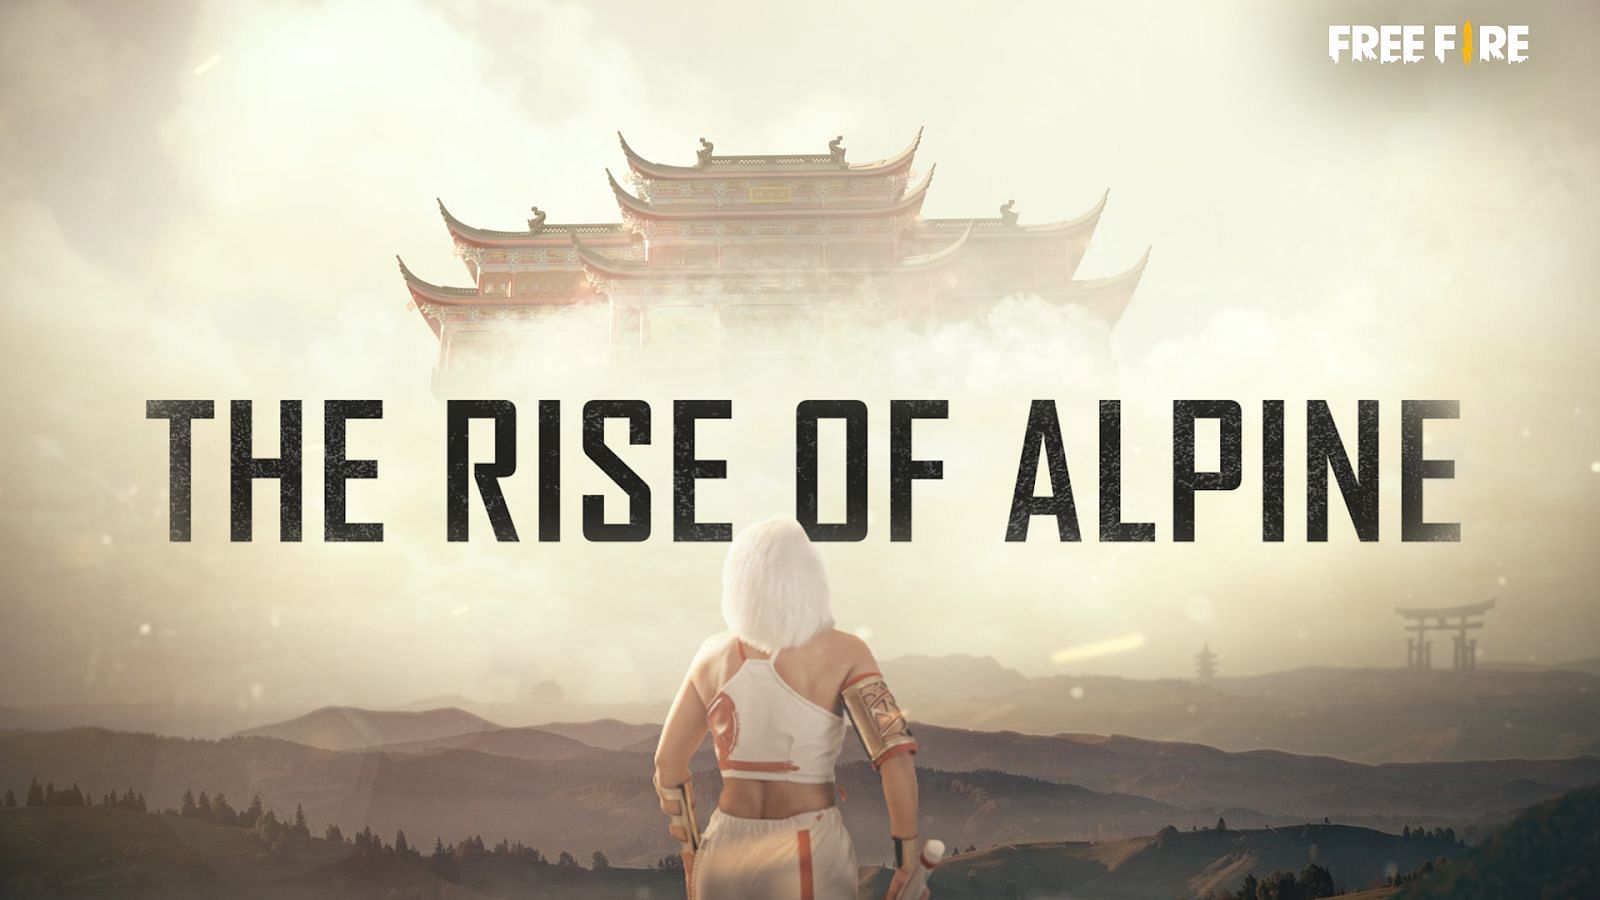 Free Fire: The Rise Of Alpine